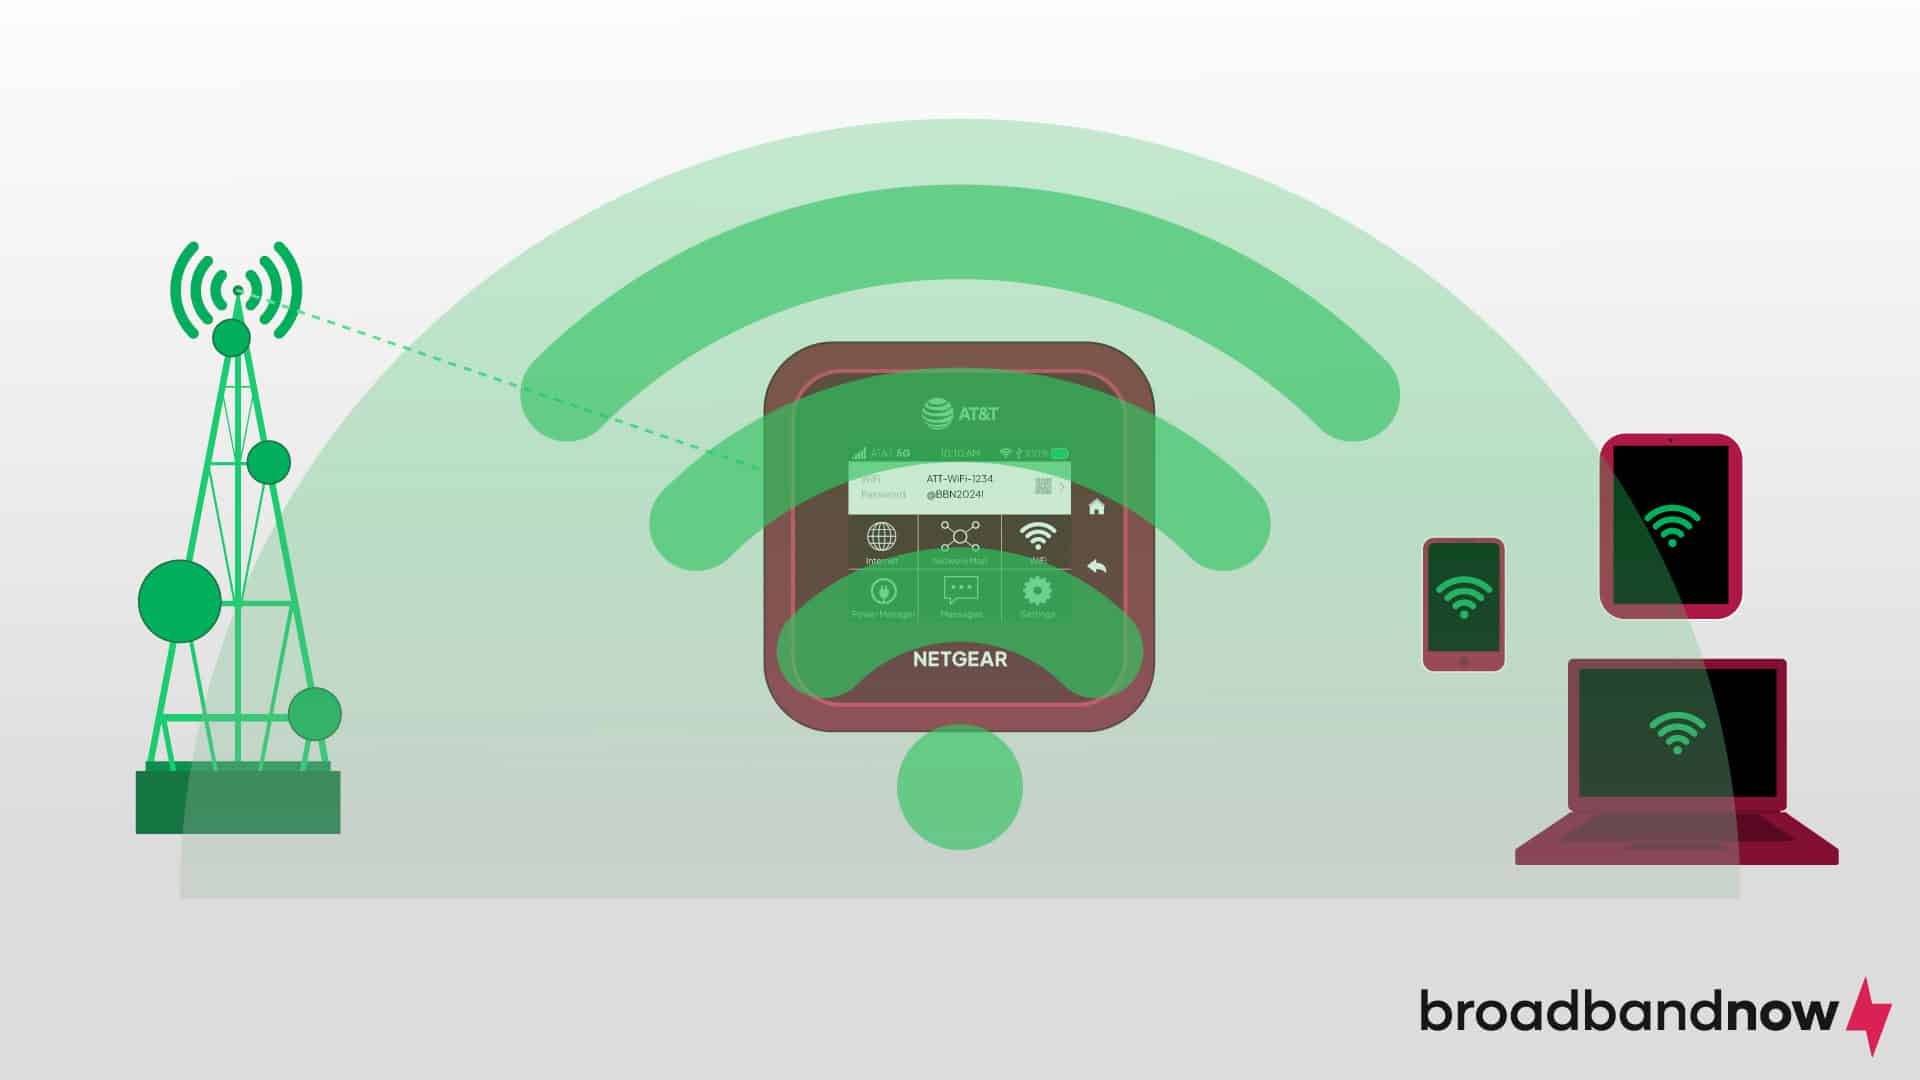 A graphic showing connectivity on Mi-Fi devices.